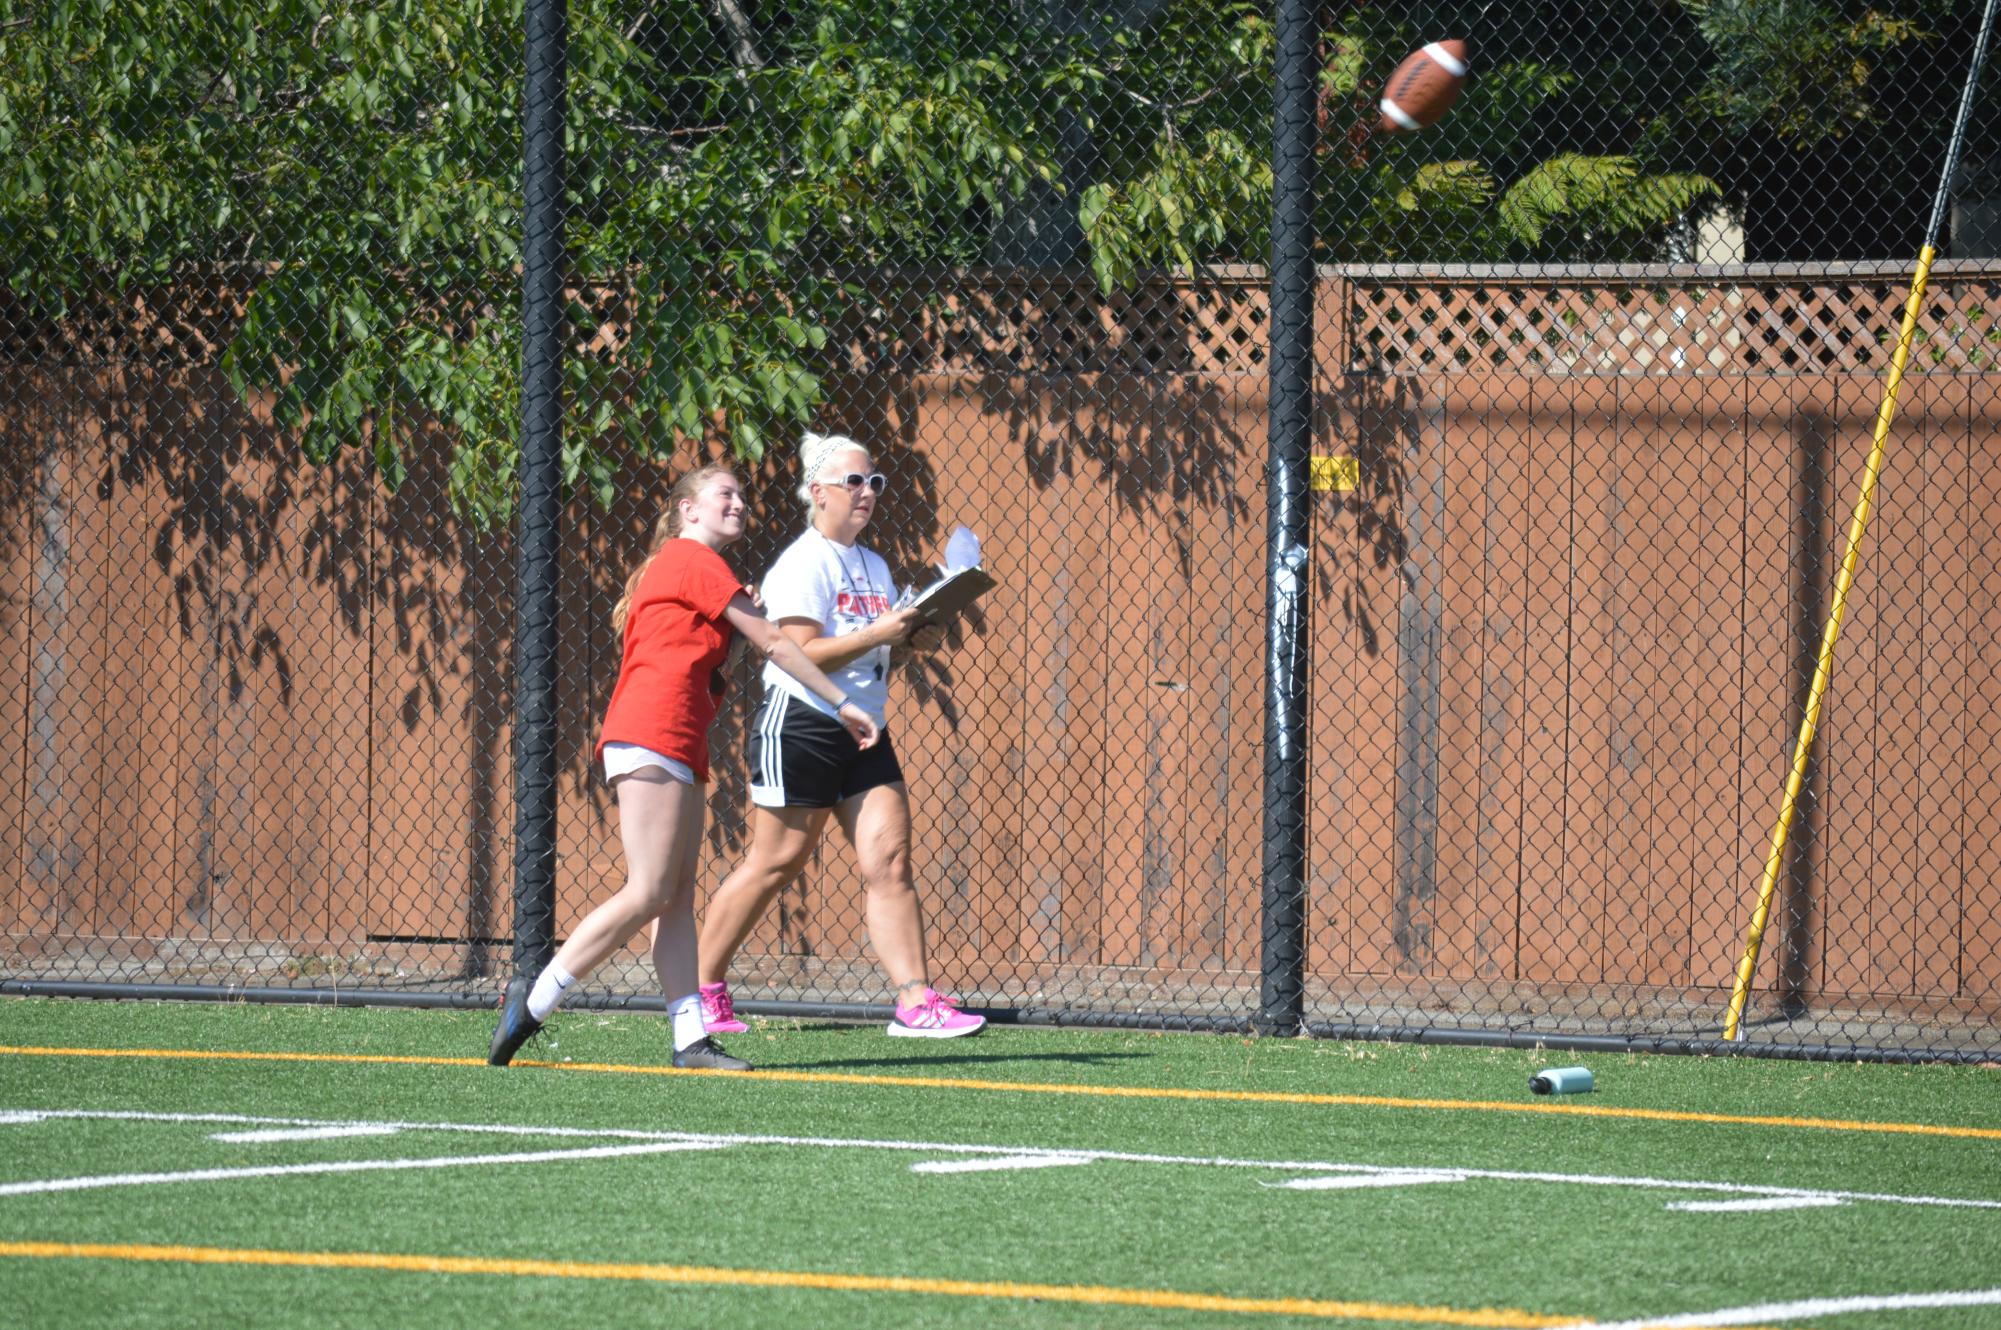 Sophomore Brooke Schuman is watched by coach Denise Burch as she throws a strong spiral to her partner during the intense tryouts.